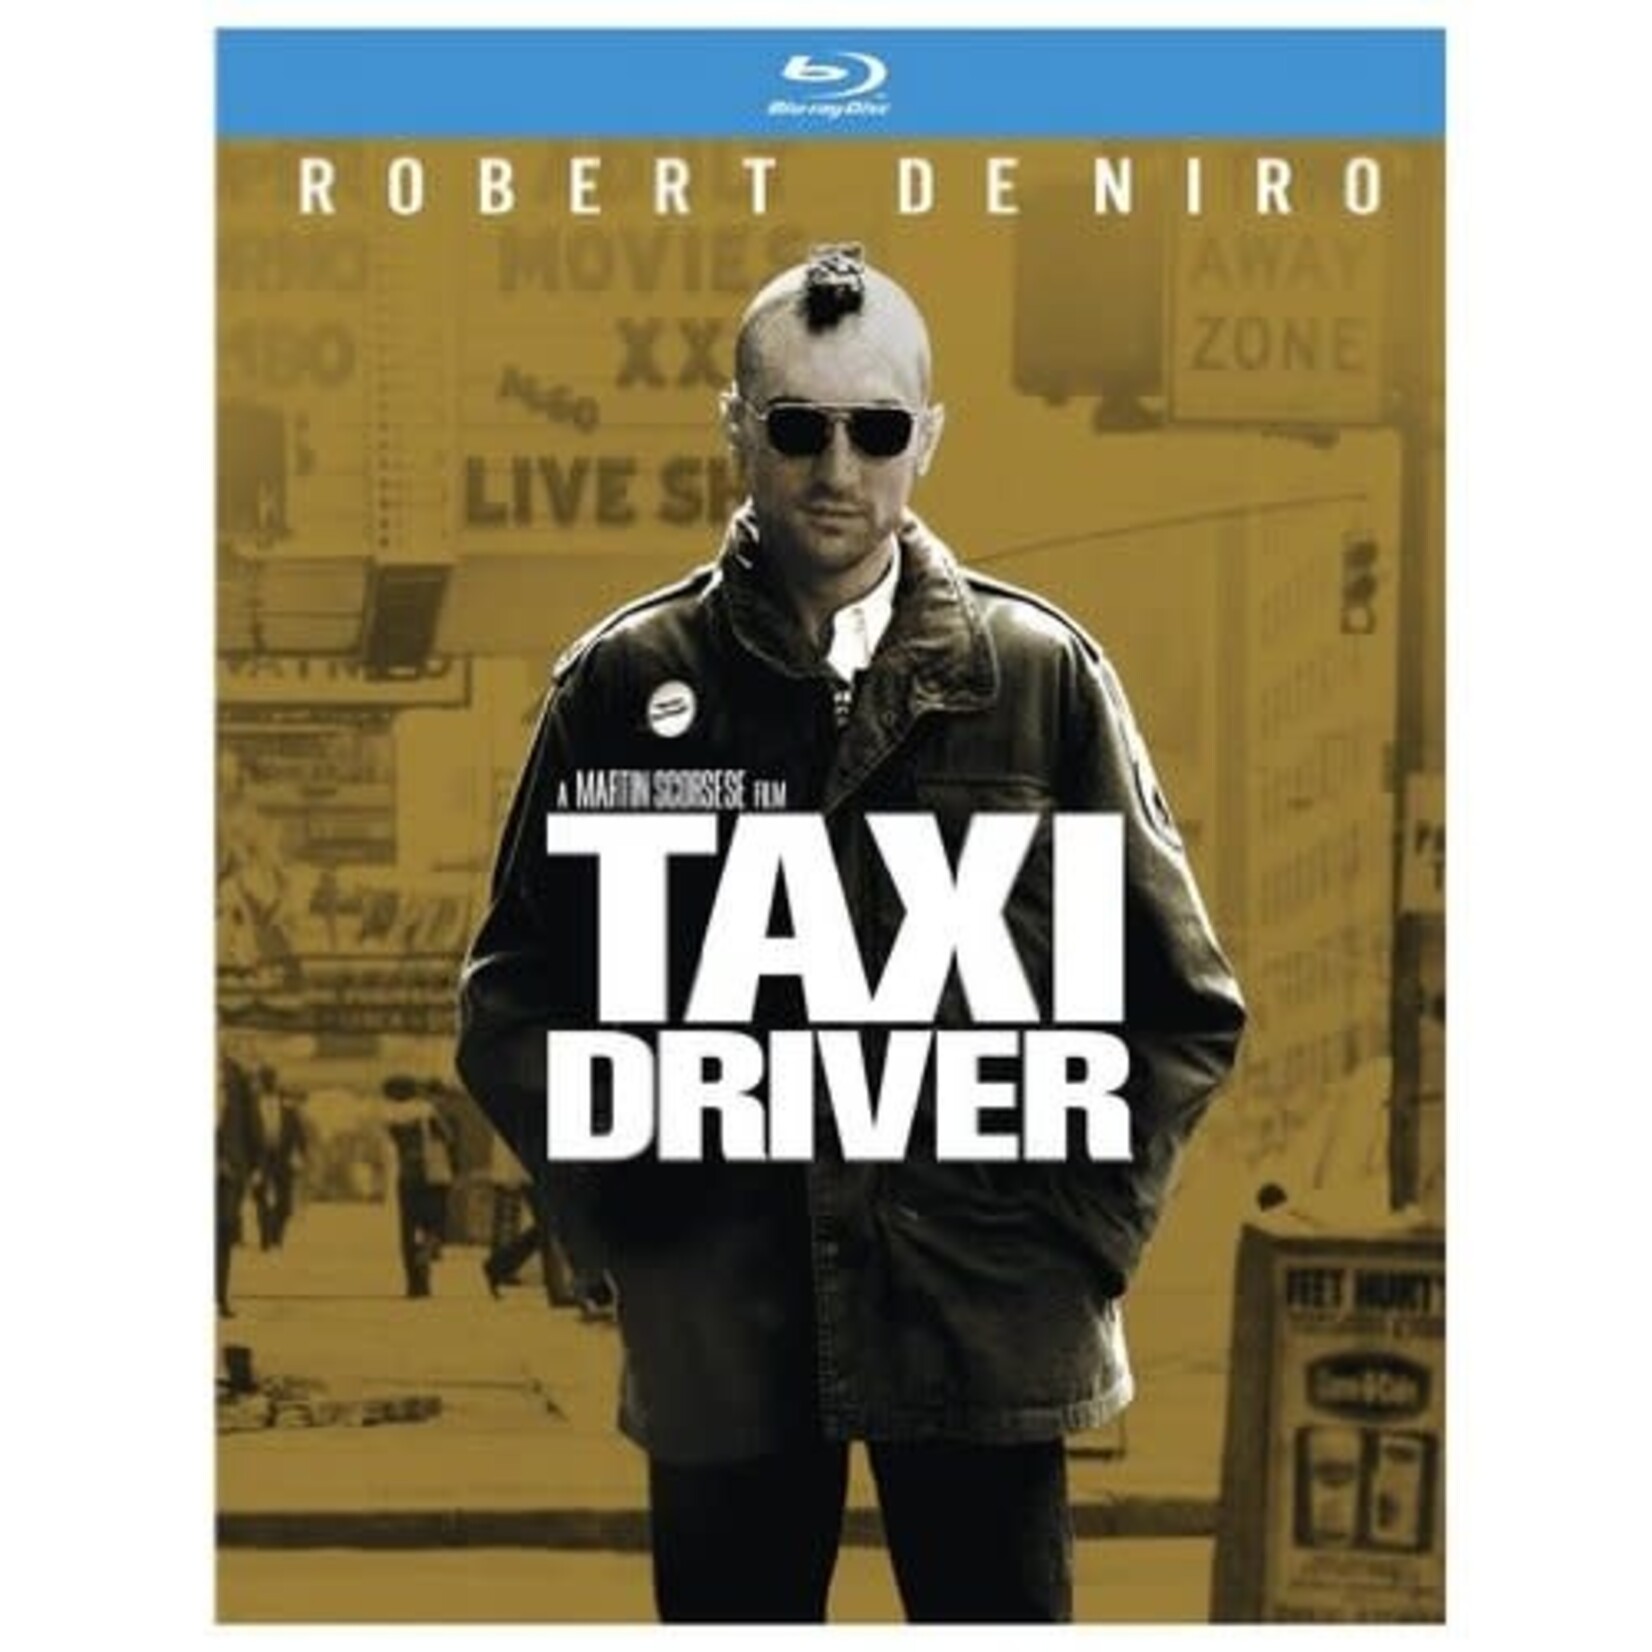 Taxi Driver (1976) [USED BRD]